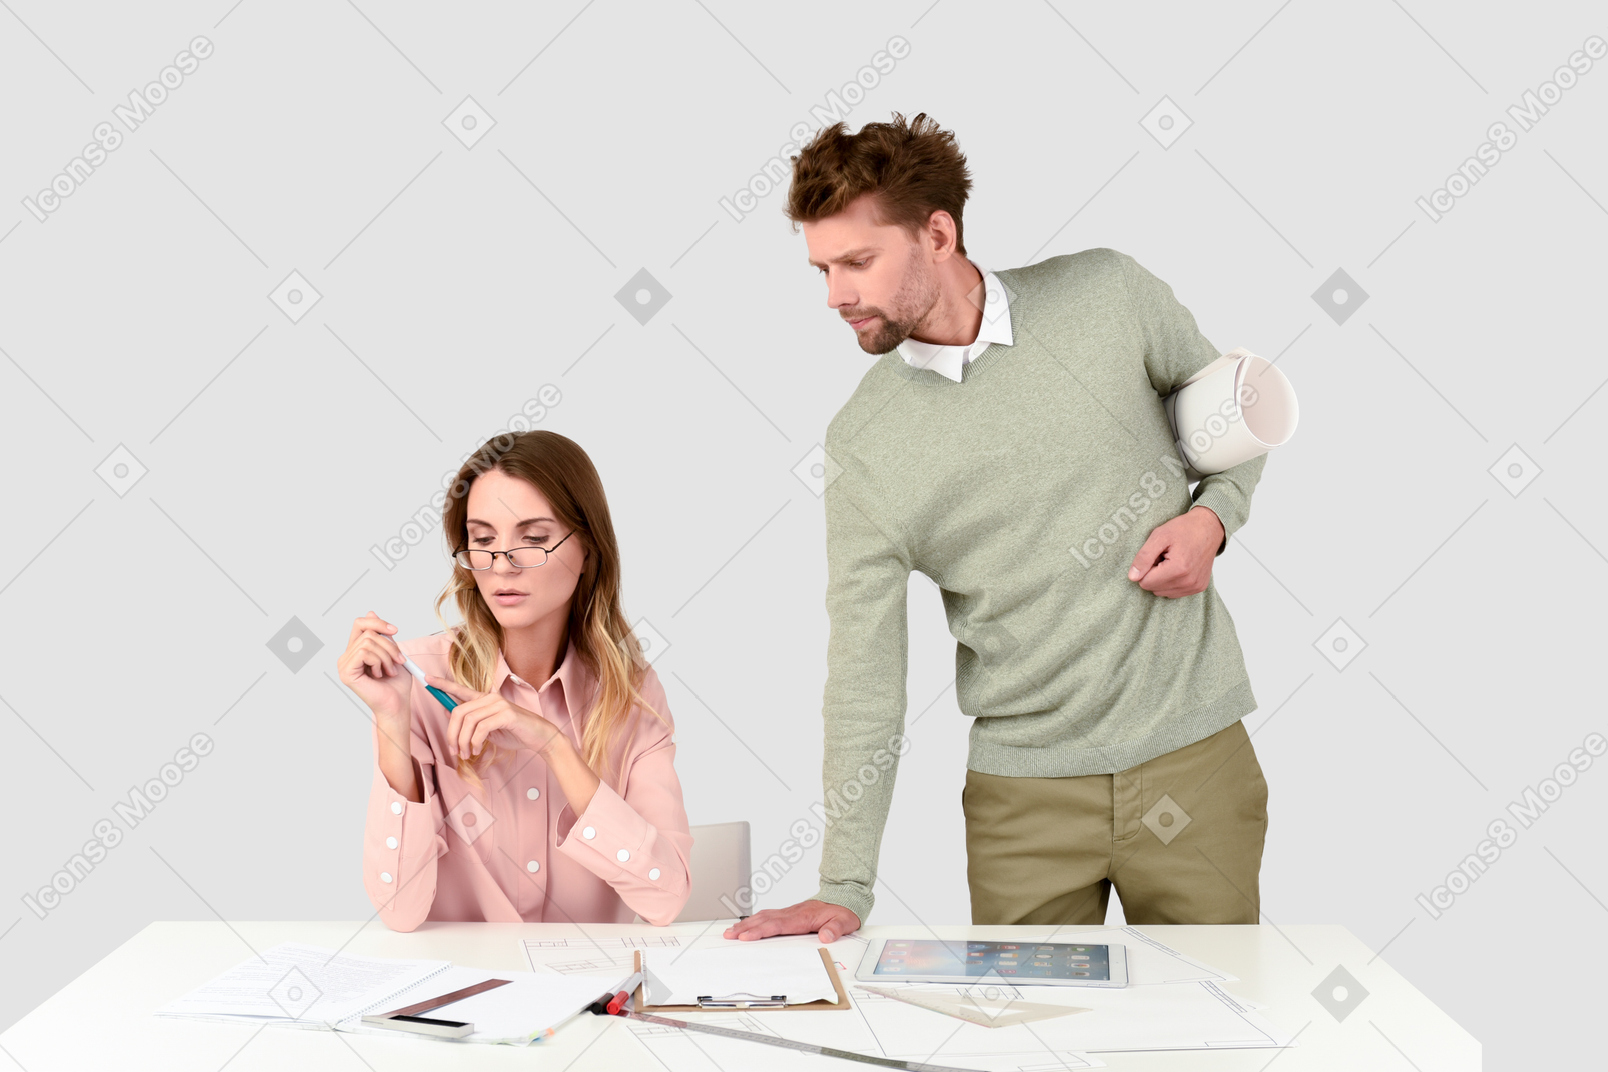 A man and a woman looking at papers on a table